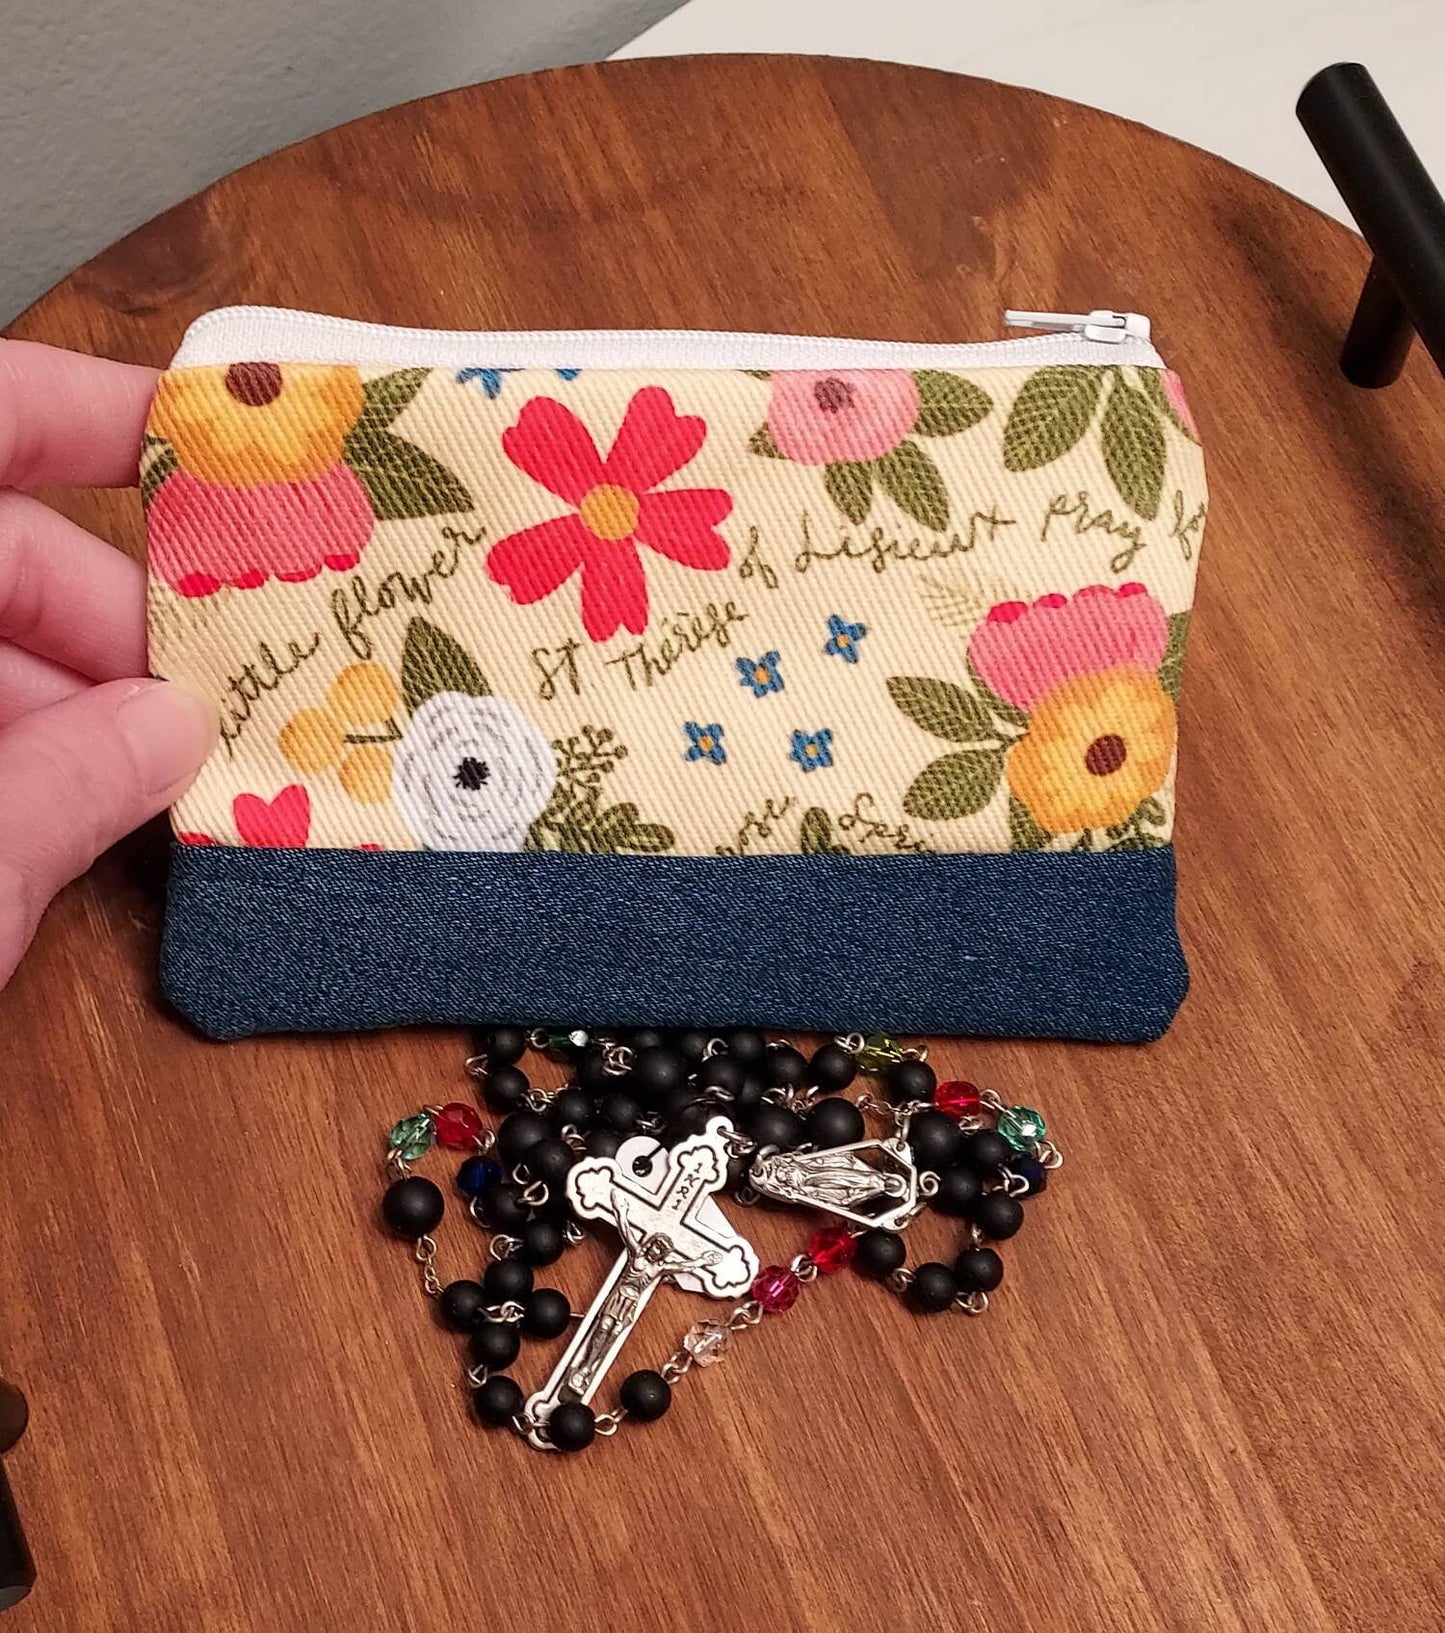 Wallet St. Therese of Lisieux Catholic fabric Limited Edition Christian Confirmation Mass First Communion Prayer book purse